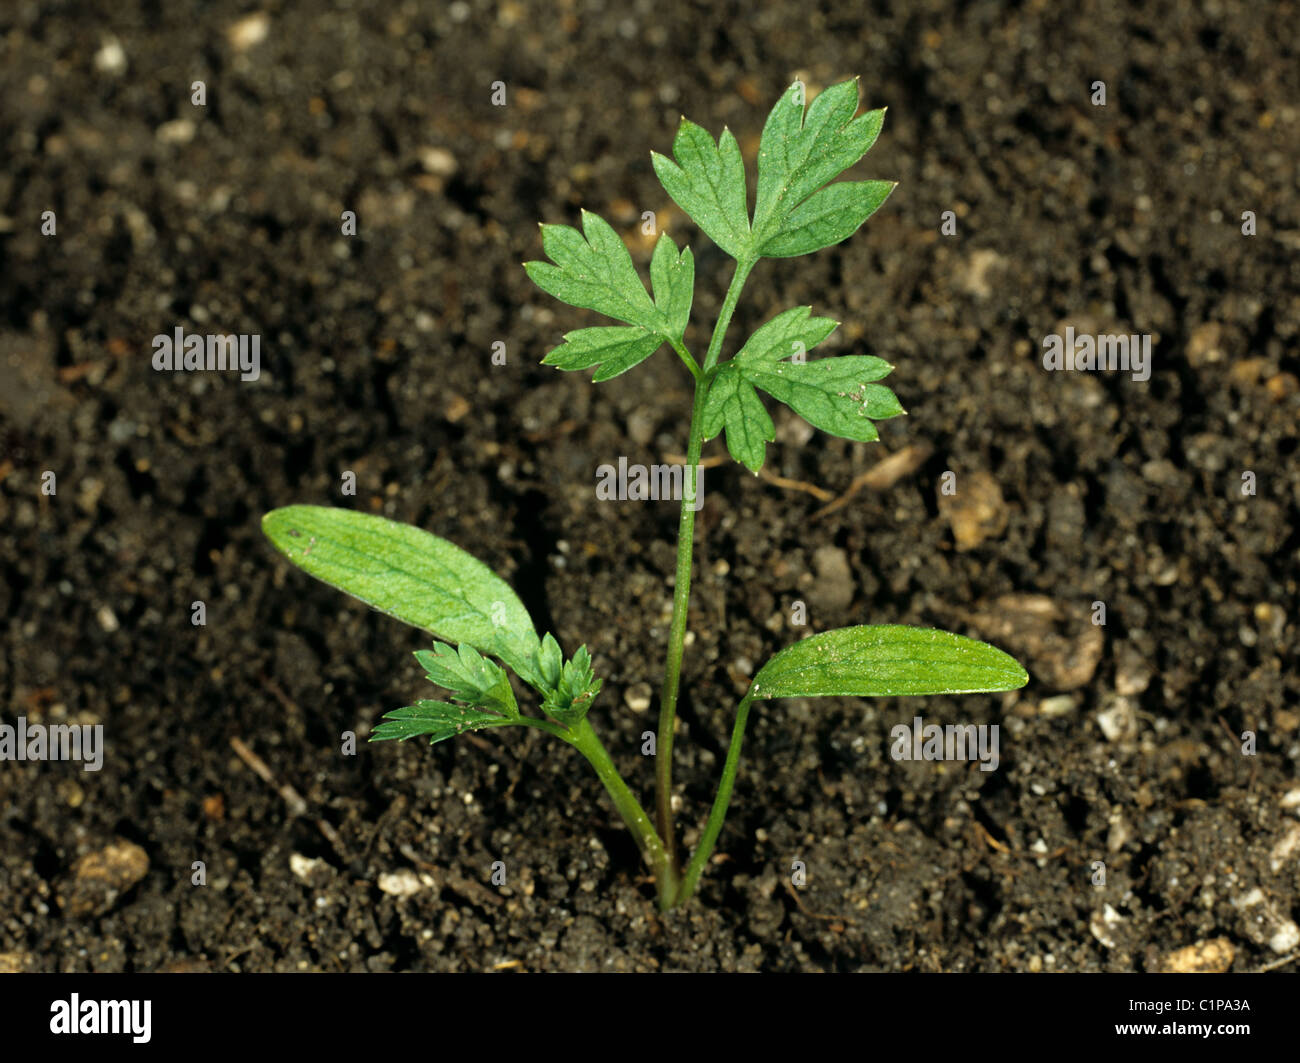 Fool's parsley (Aethusa cynapium) seedling cotyledons and second true leaf forming Stock Photo